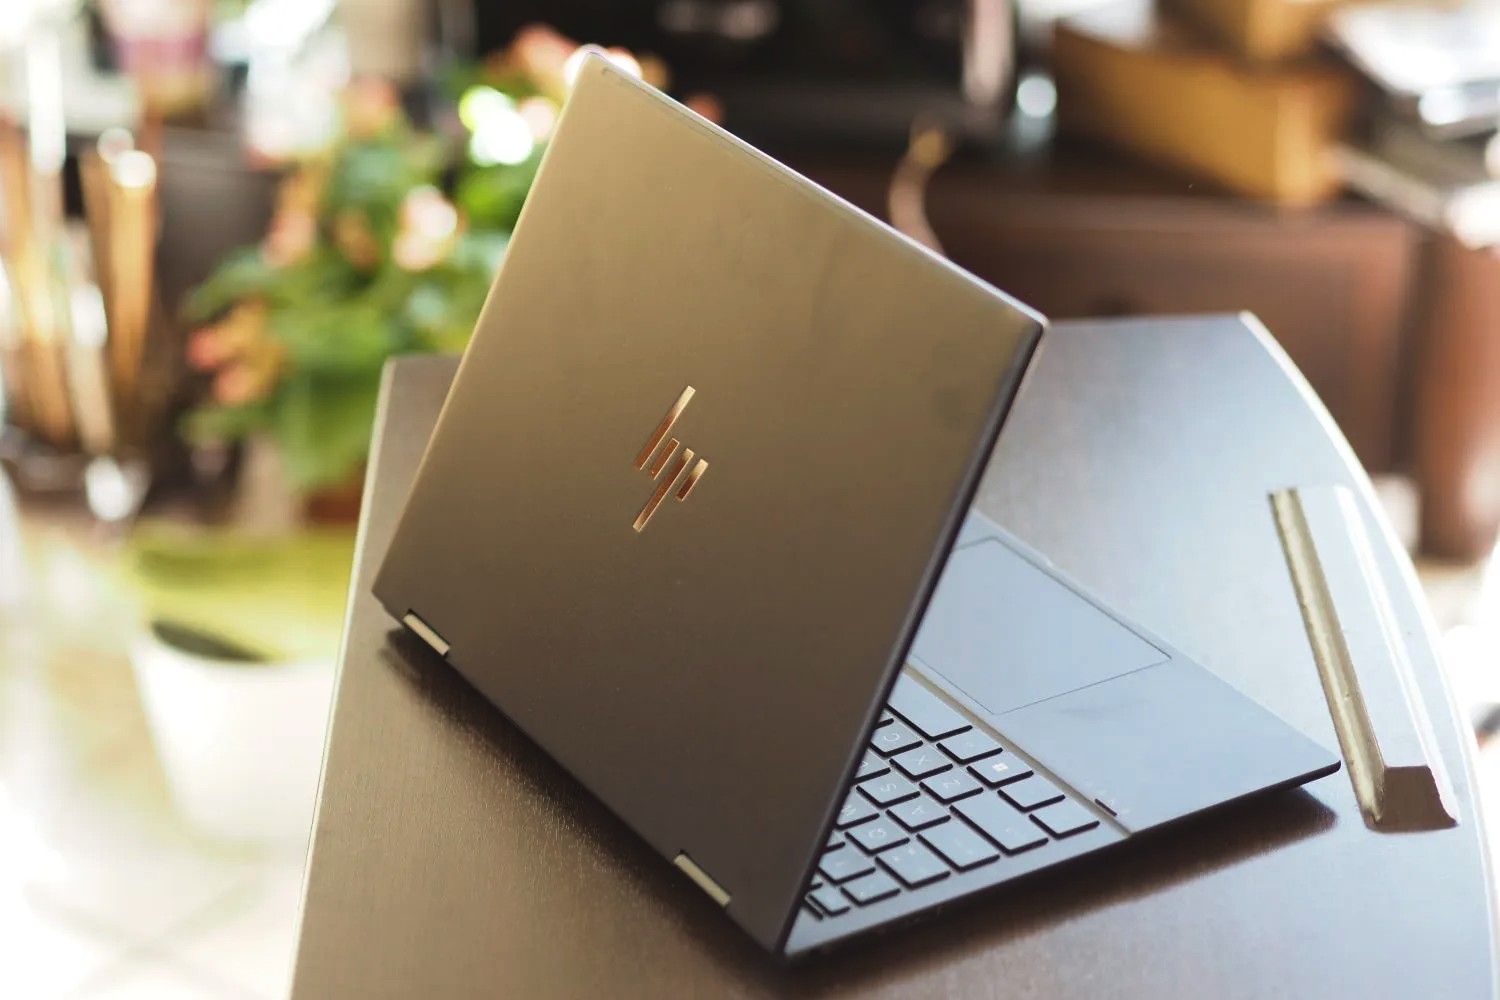 HP Envy x360 with IMAX display review: A worthy MacBook Air